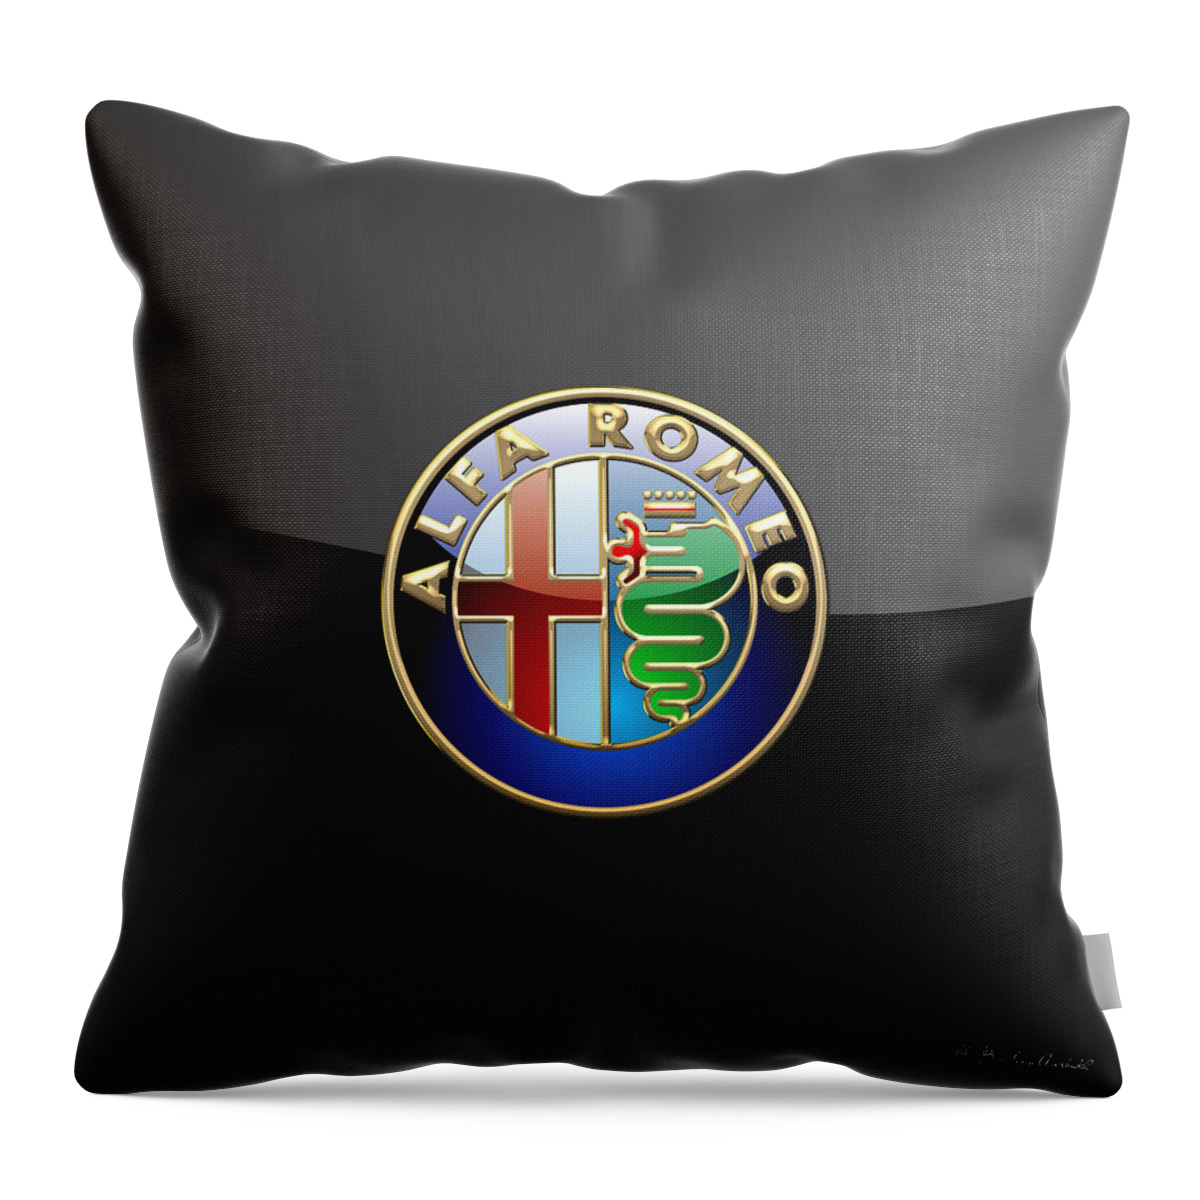 Wheels Of Fortune� Collection By Serge Averbukh Throw Pillow featuring the photograph Alfa Romeo - 3 D Badge on Black by Serge Averbukh